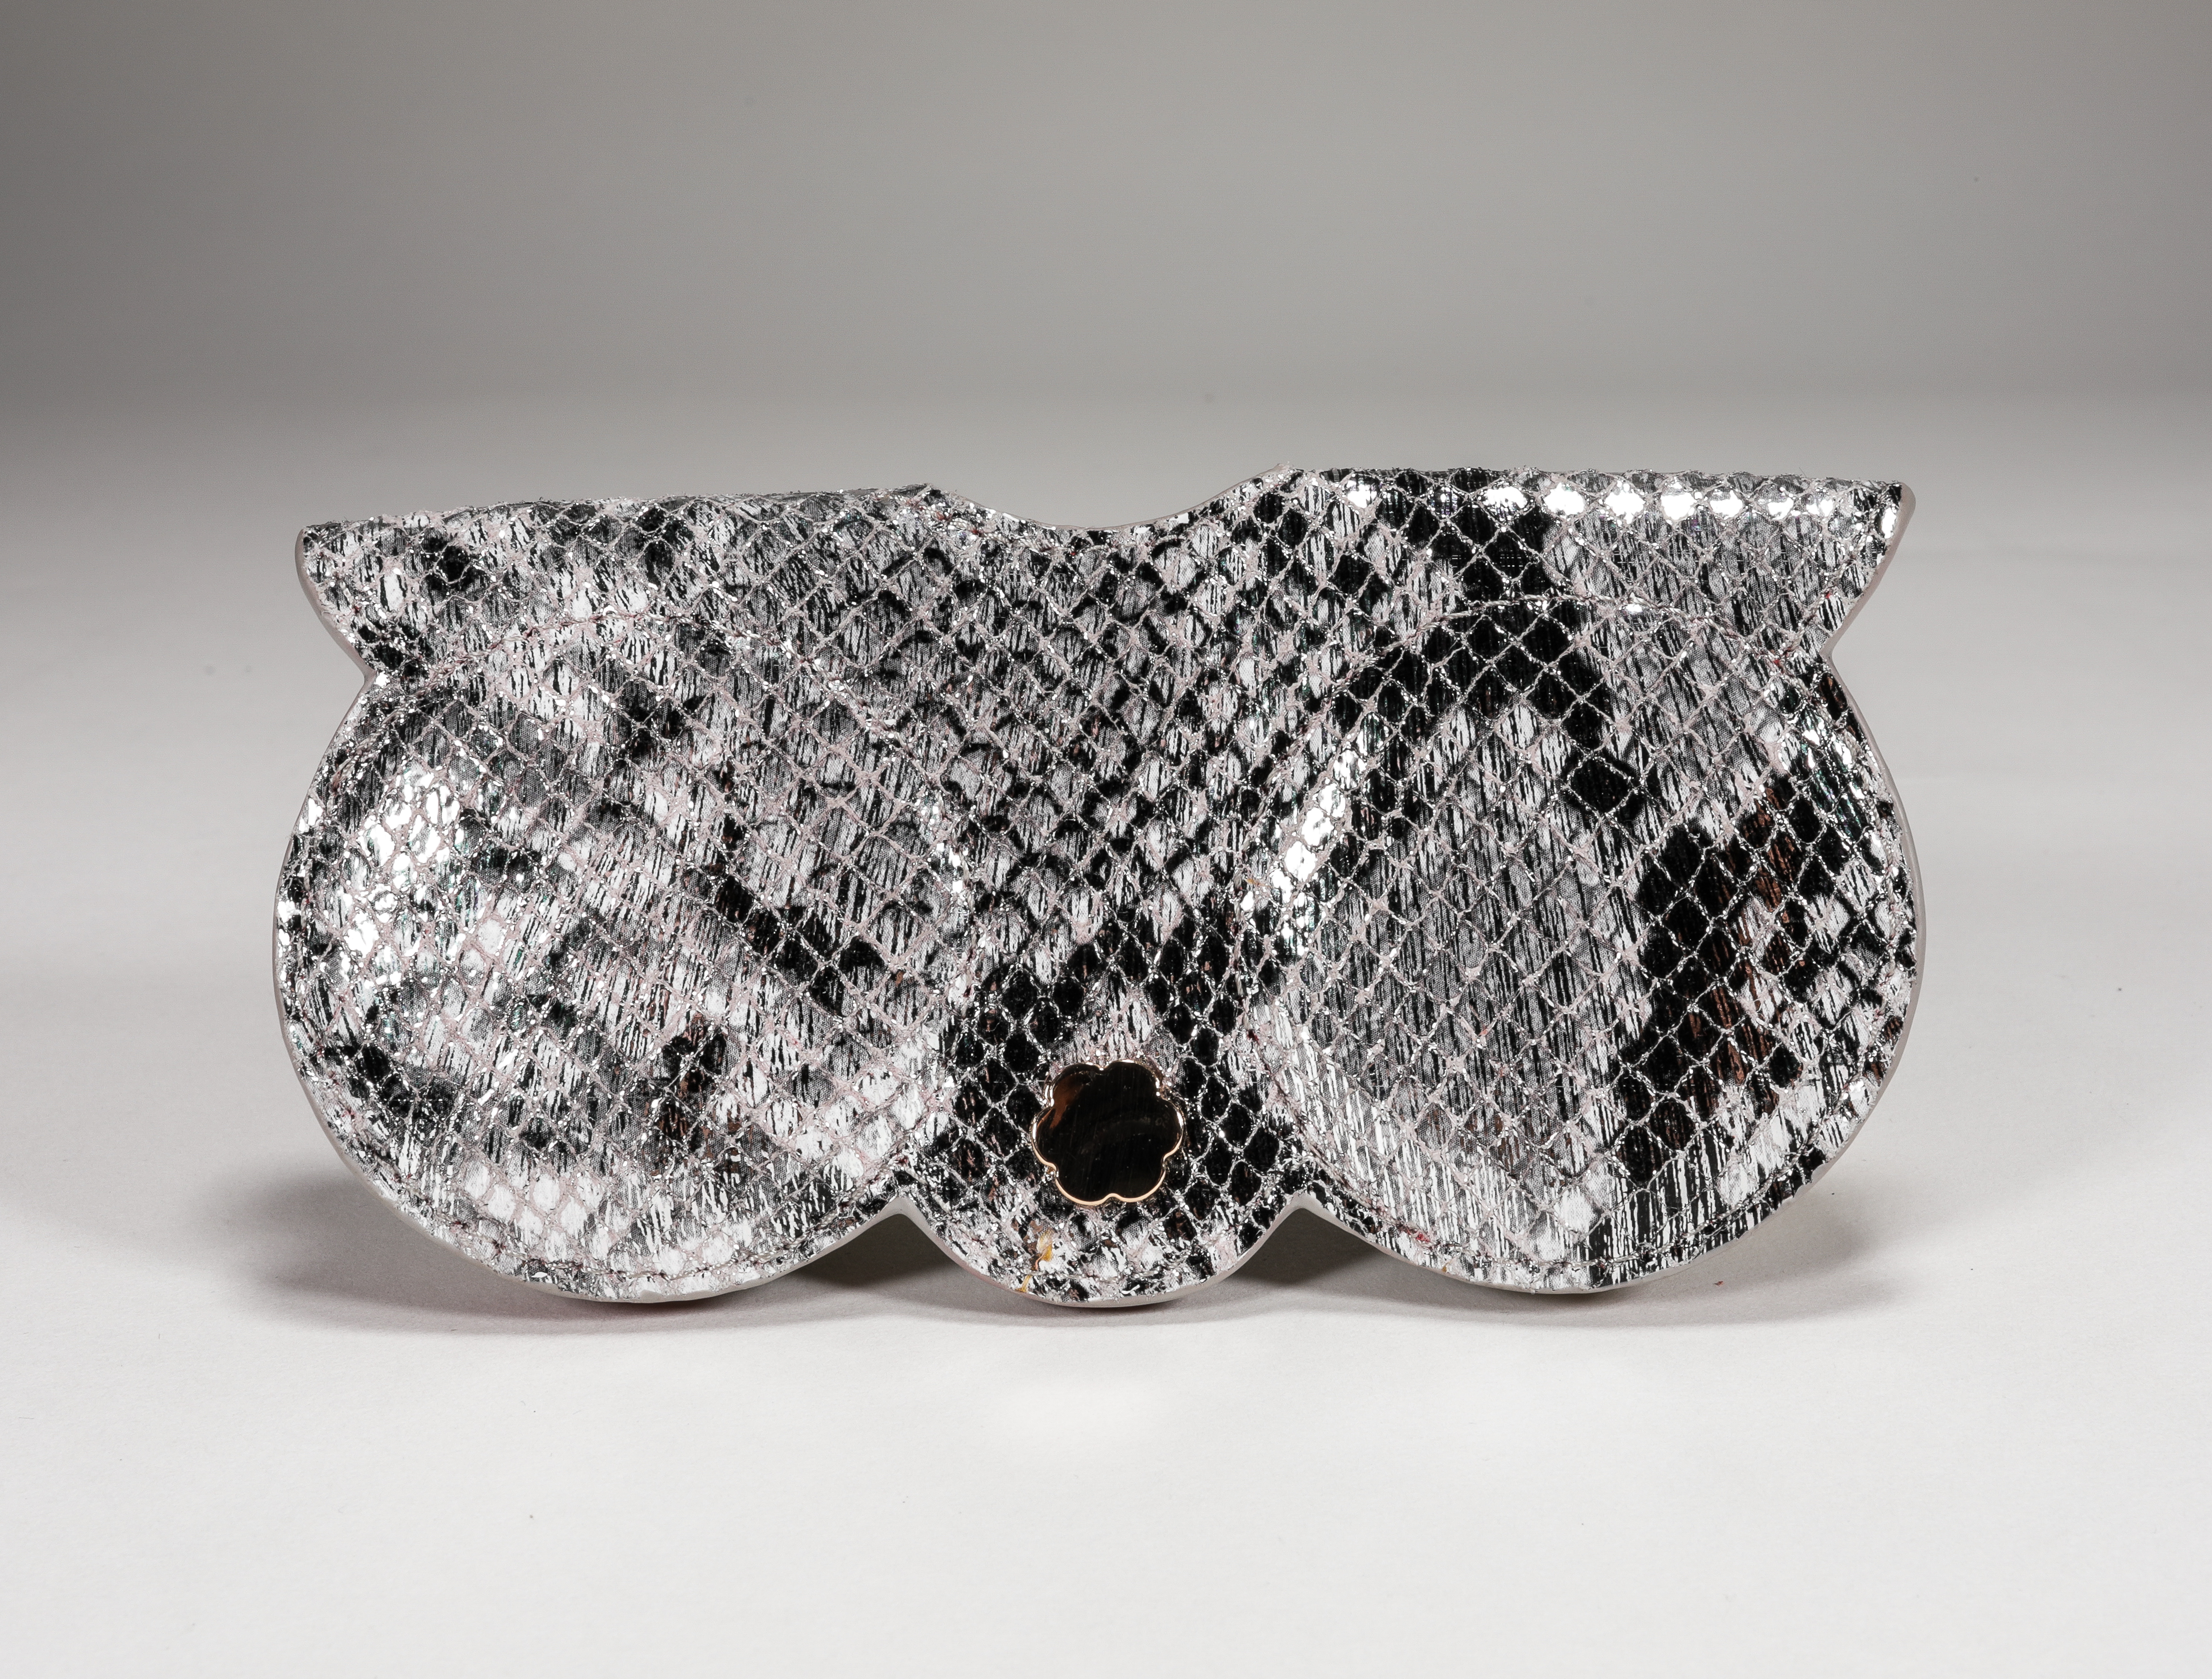 2021 Sunglasses, Silver Snakeskin-print Glasses, Button And Portable, Easy To Carry, Simple And Clear